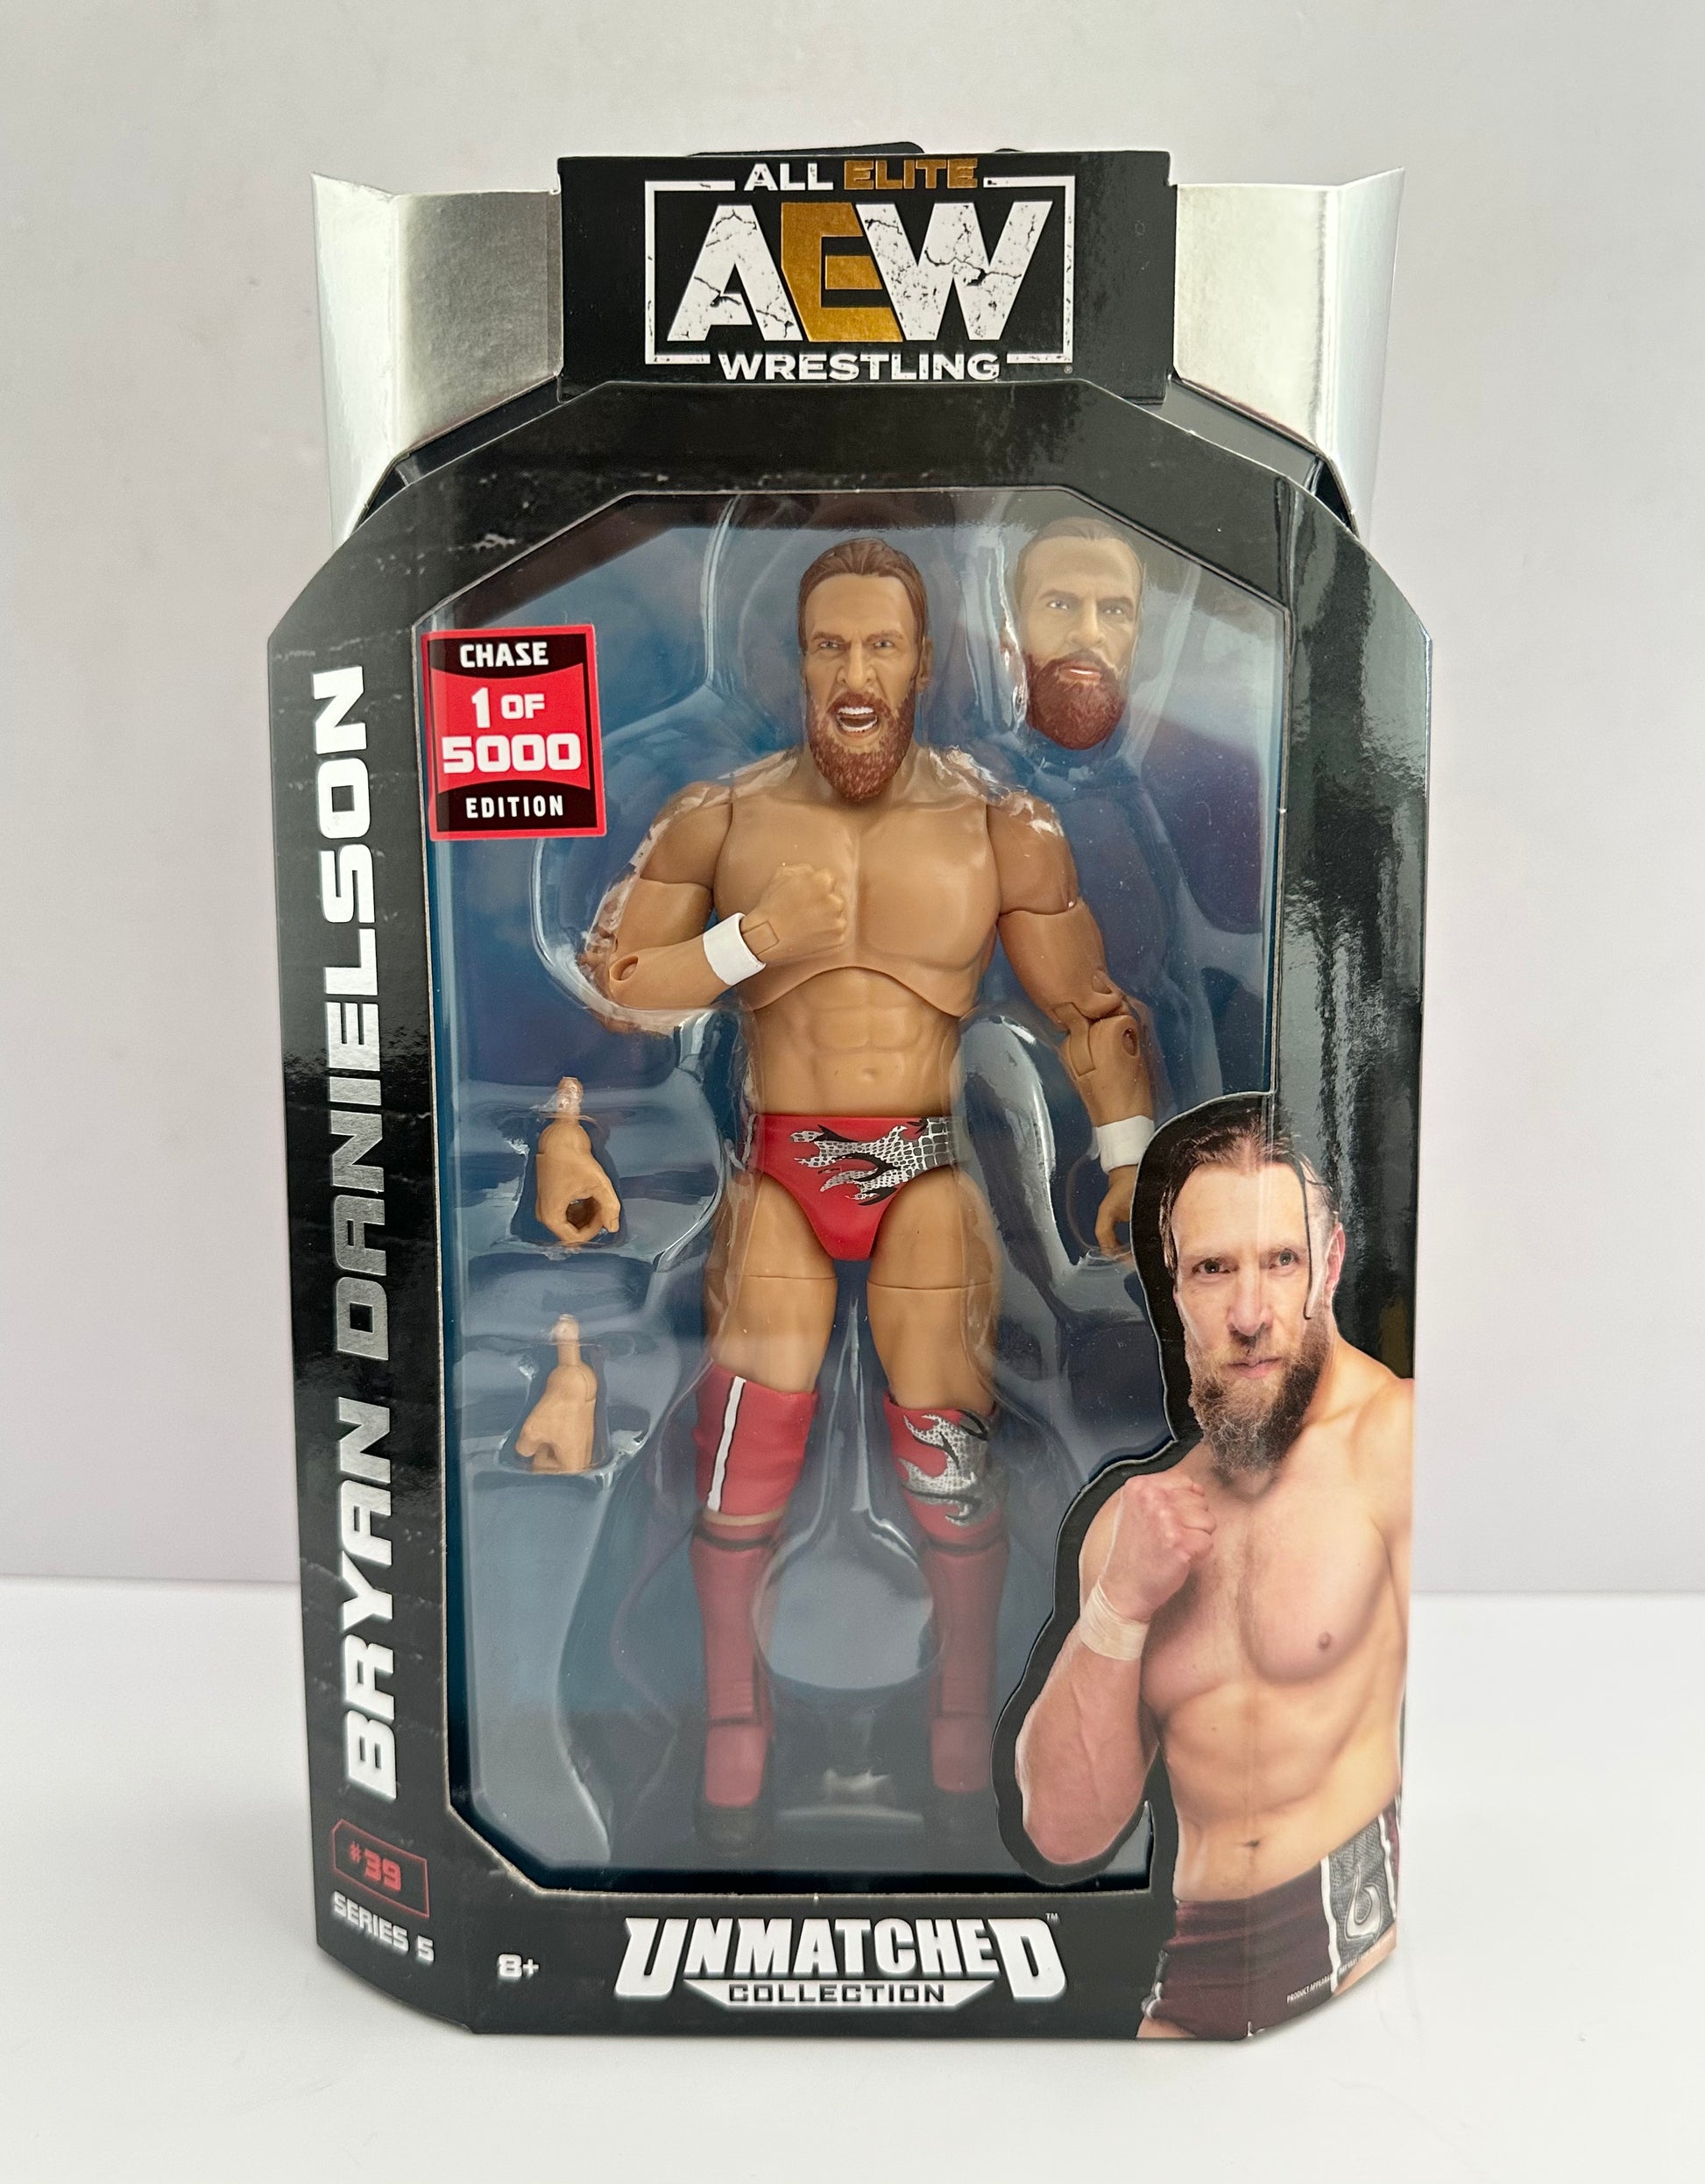 Hook - 1 of 5000 Chase Edition AEW Unmatched Collection: Series